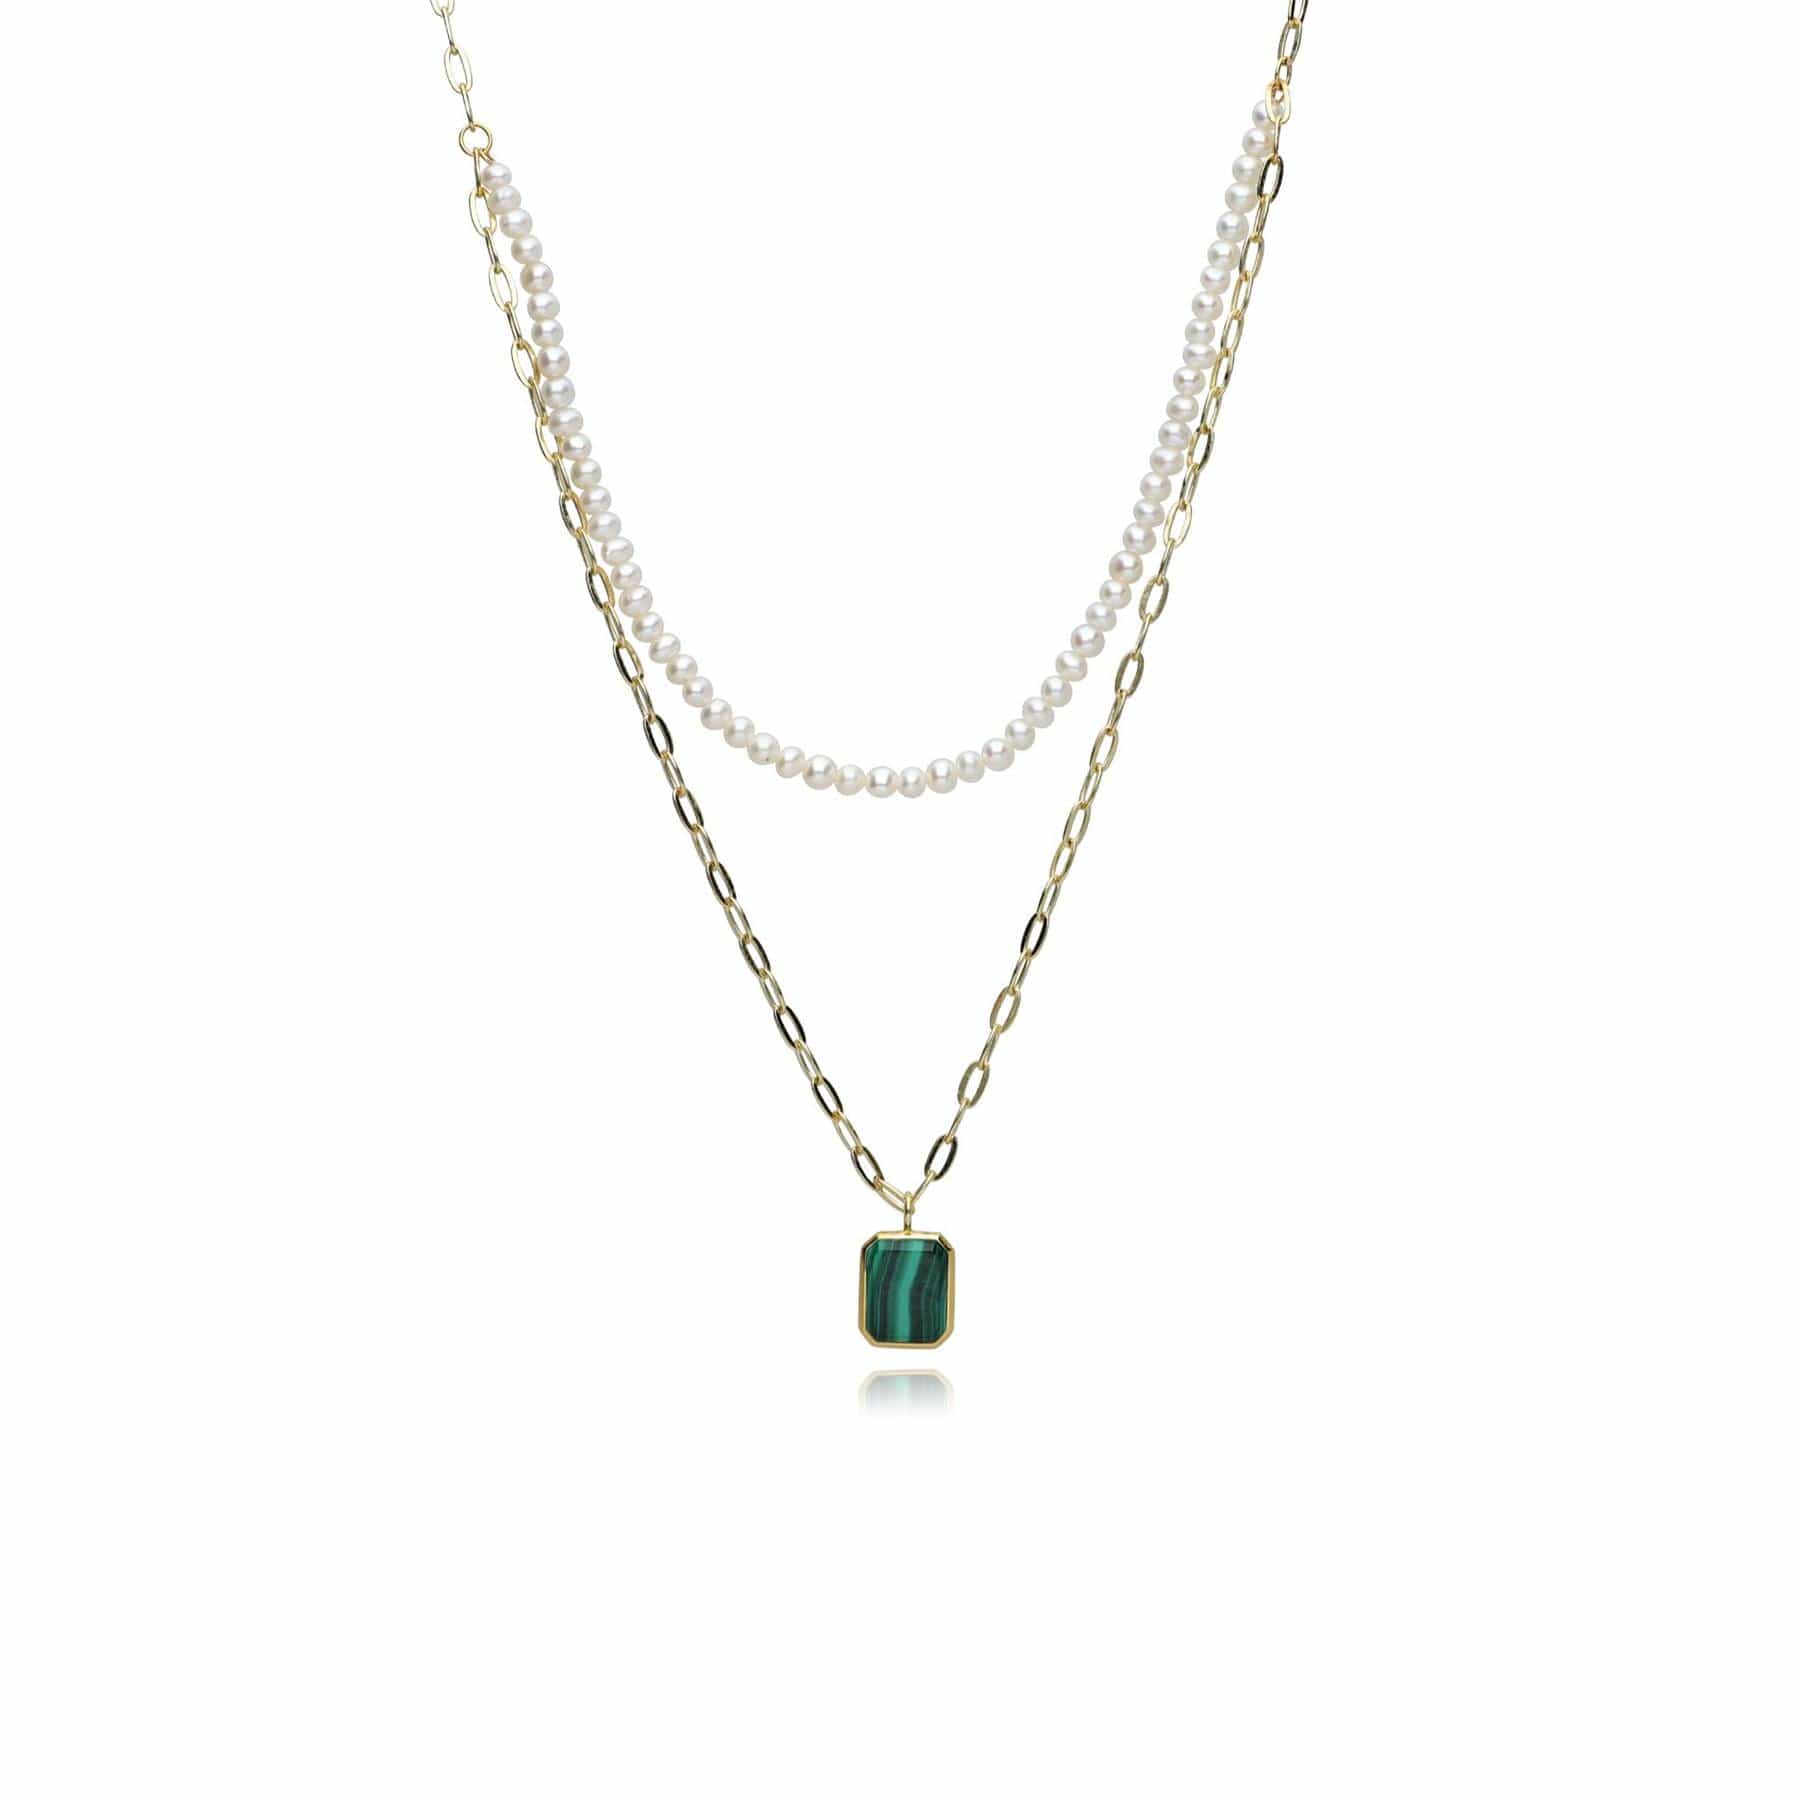 ECFEW™ 'The Unifier' Malachite & Pearl Layered Necklace